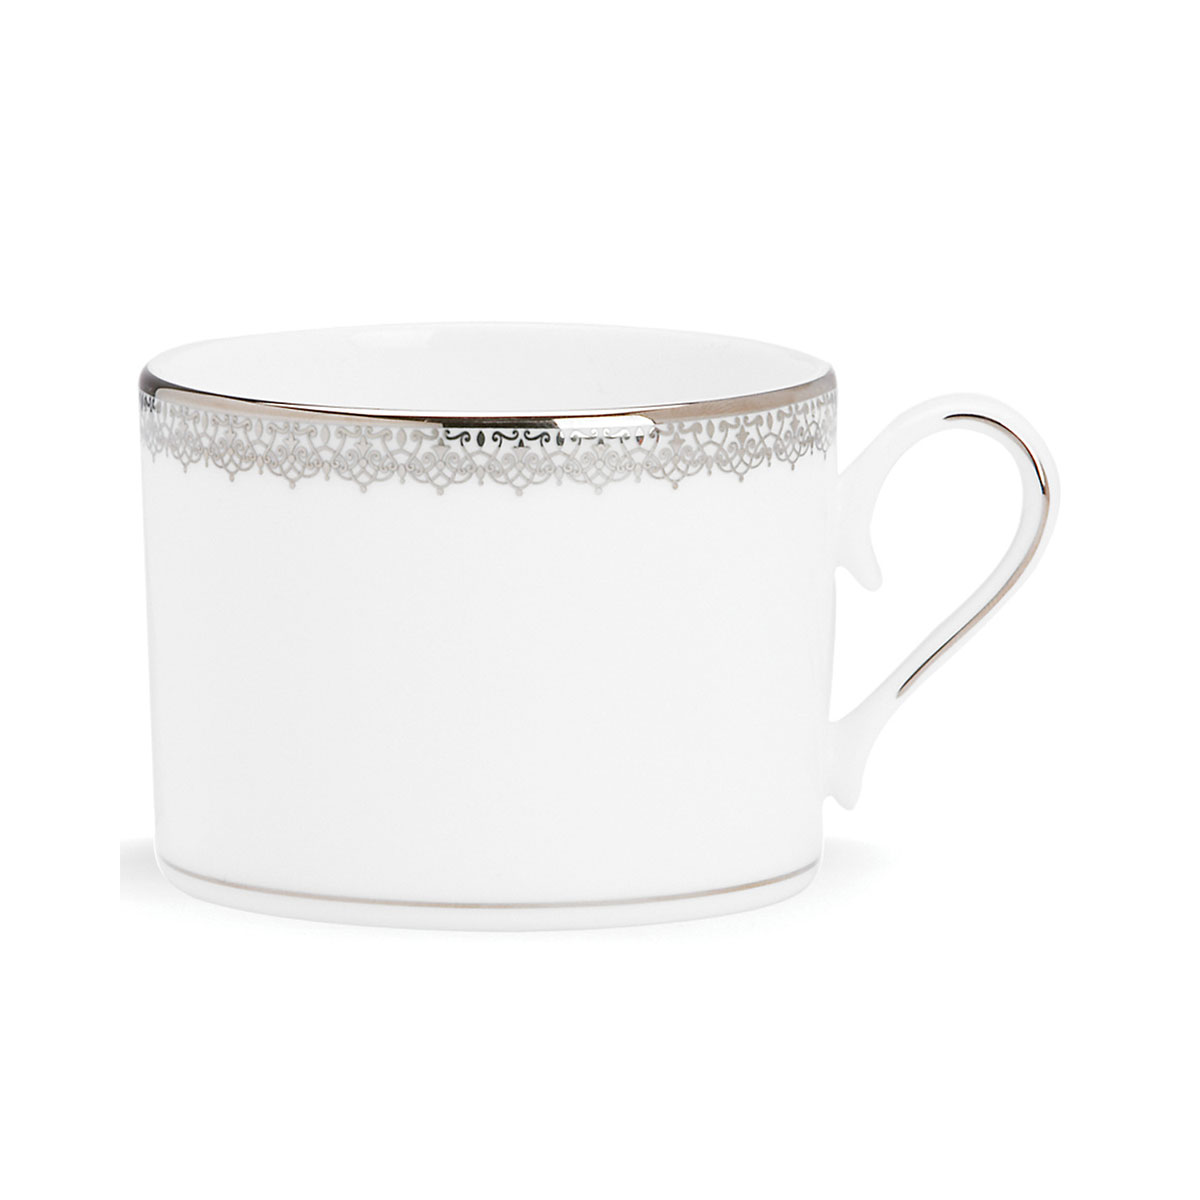 Lenox Lace Couture China Cup